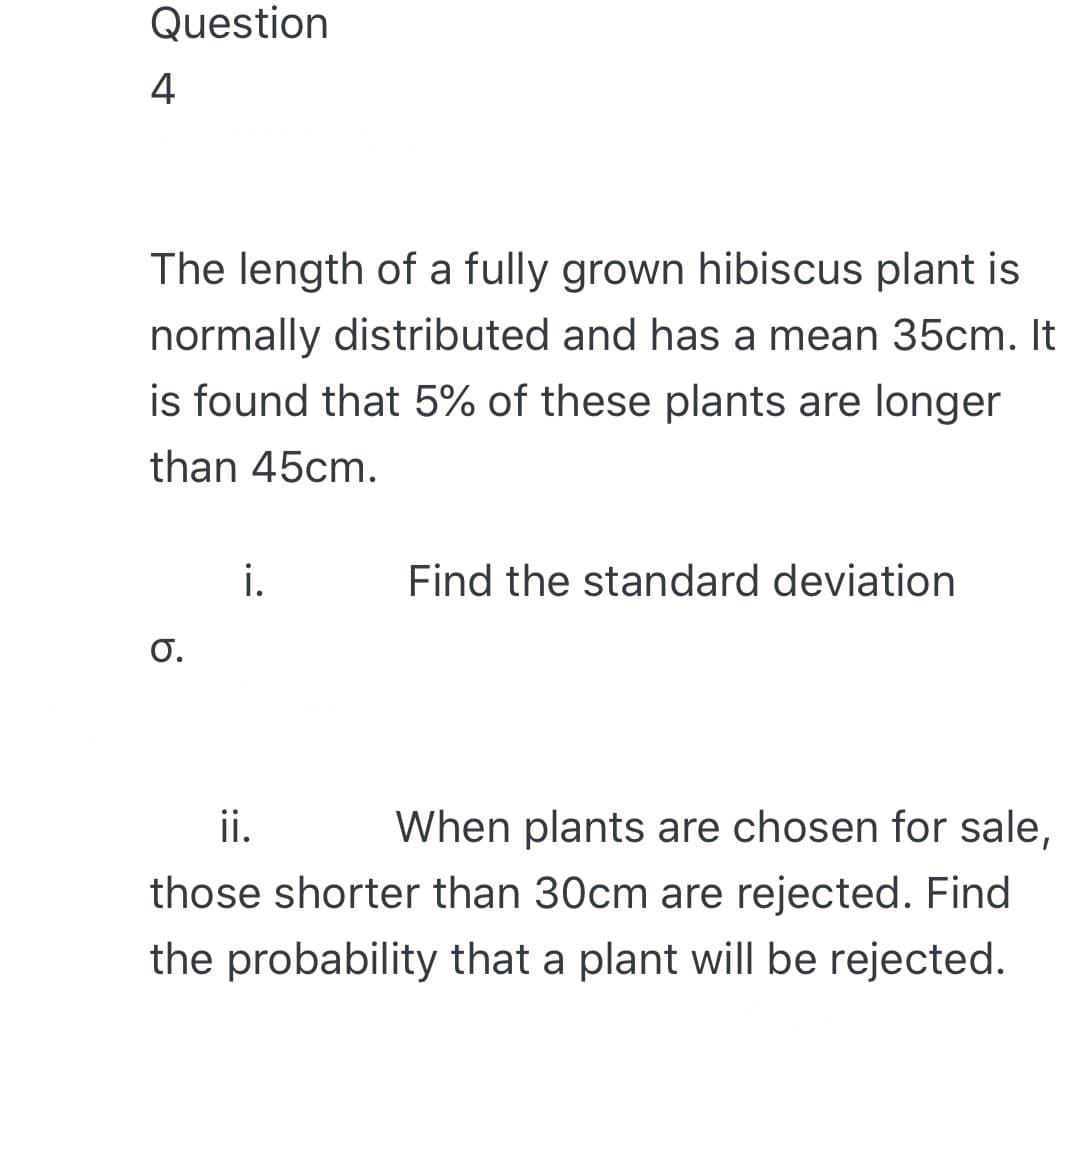 Question
4
The length of a fully grown hibiscus plant is
normally distributed and has a mean 35cm. It
is found that 5% of these plants are longer
than 45cm.
i.
Find the standard deviation
O.
ii.
When plants are chosen for sale,
those shorter than 30cm are rejected. Find
the probability that a plant will be rejected.
